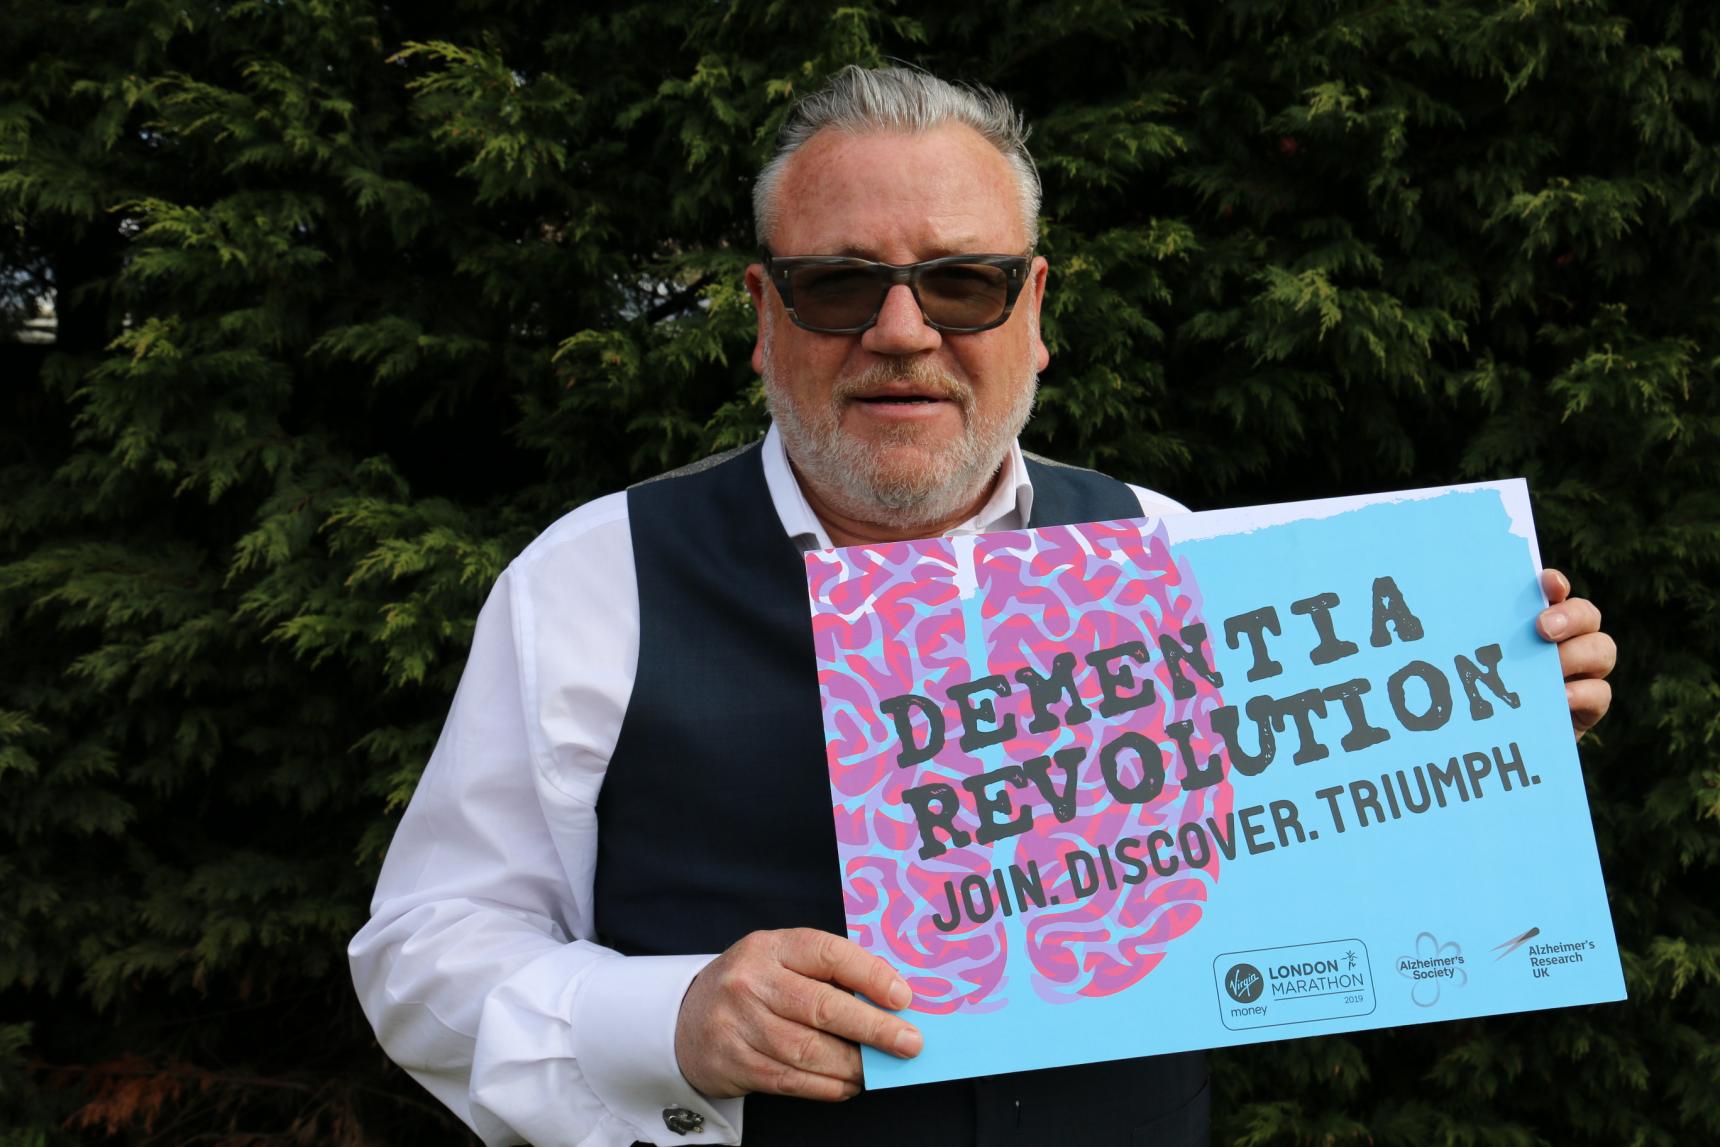 Ray Winstone holding a dementia revolution sign